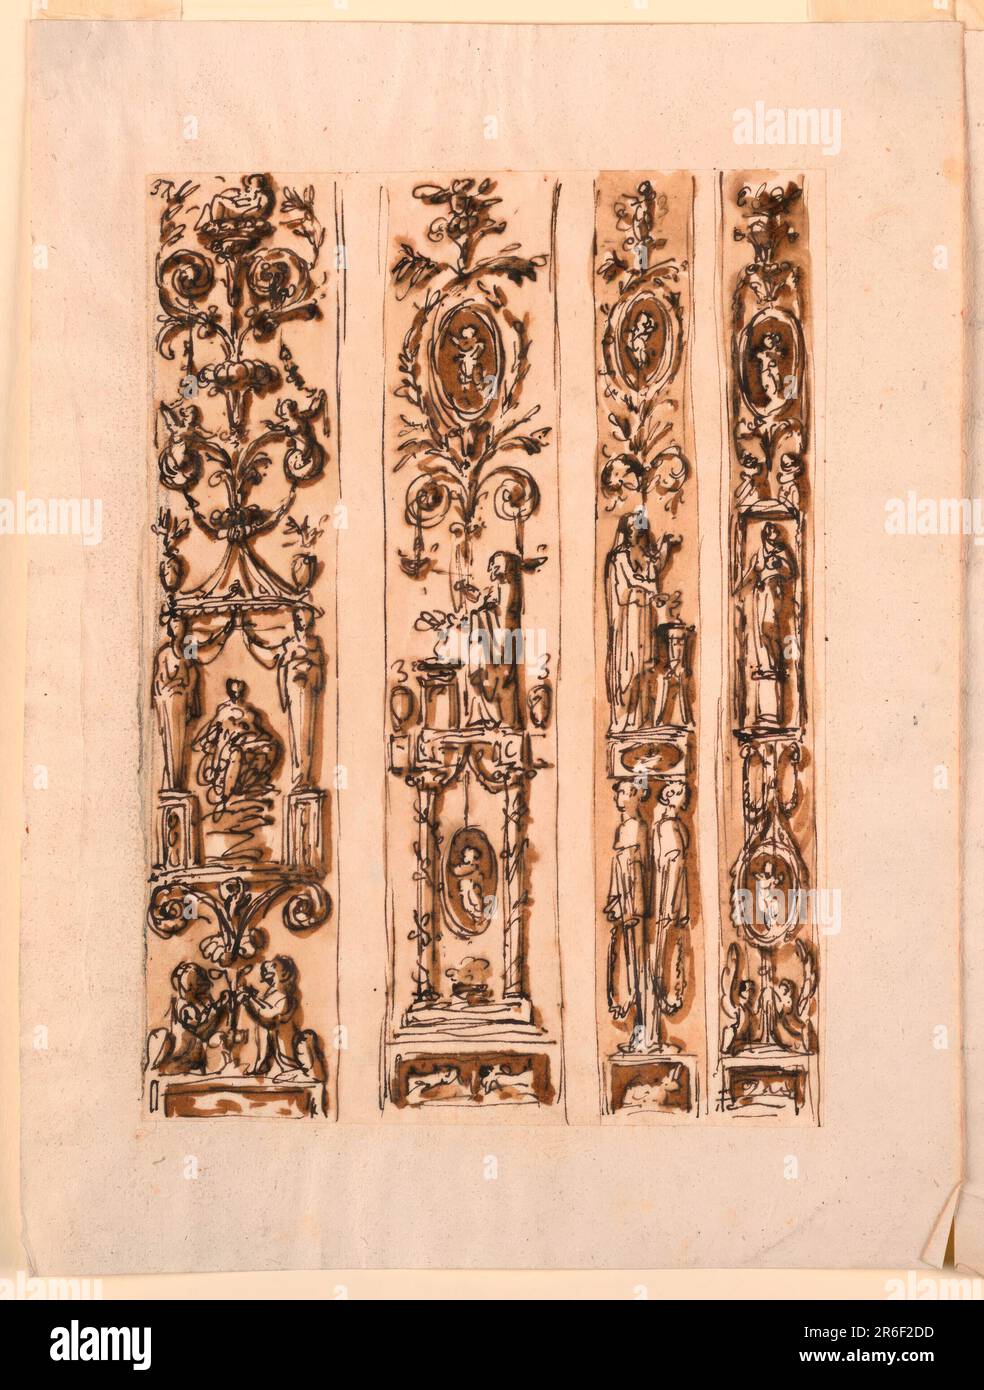 One beside the other, separated by empty strips. Each decoration follows the scheme of the candelabrum, starting below from a box-like base. The first two strips are of a greater width than the last ones. Left row: two crouching lions support the stem of a palmette flower above which rises a pavillion with a goddess inside sitting upon clouds. A plant candelabrum springs from the roof of the pavilion. Charcoal lines are at the left edge. Second row: Two fighting animals are represented at the base. Above is a plant candelabrum, with an ovoidal medallion with a figure in the center. Third row: Stock Photo